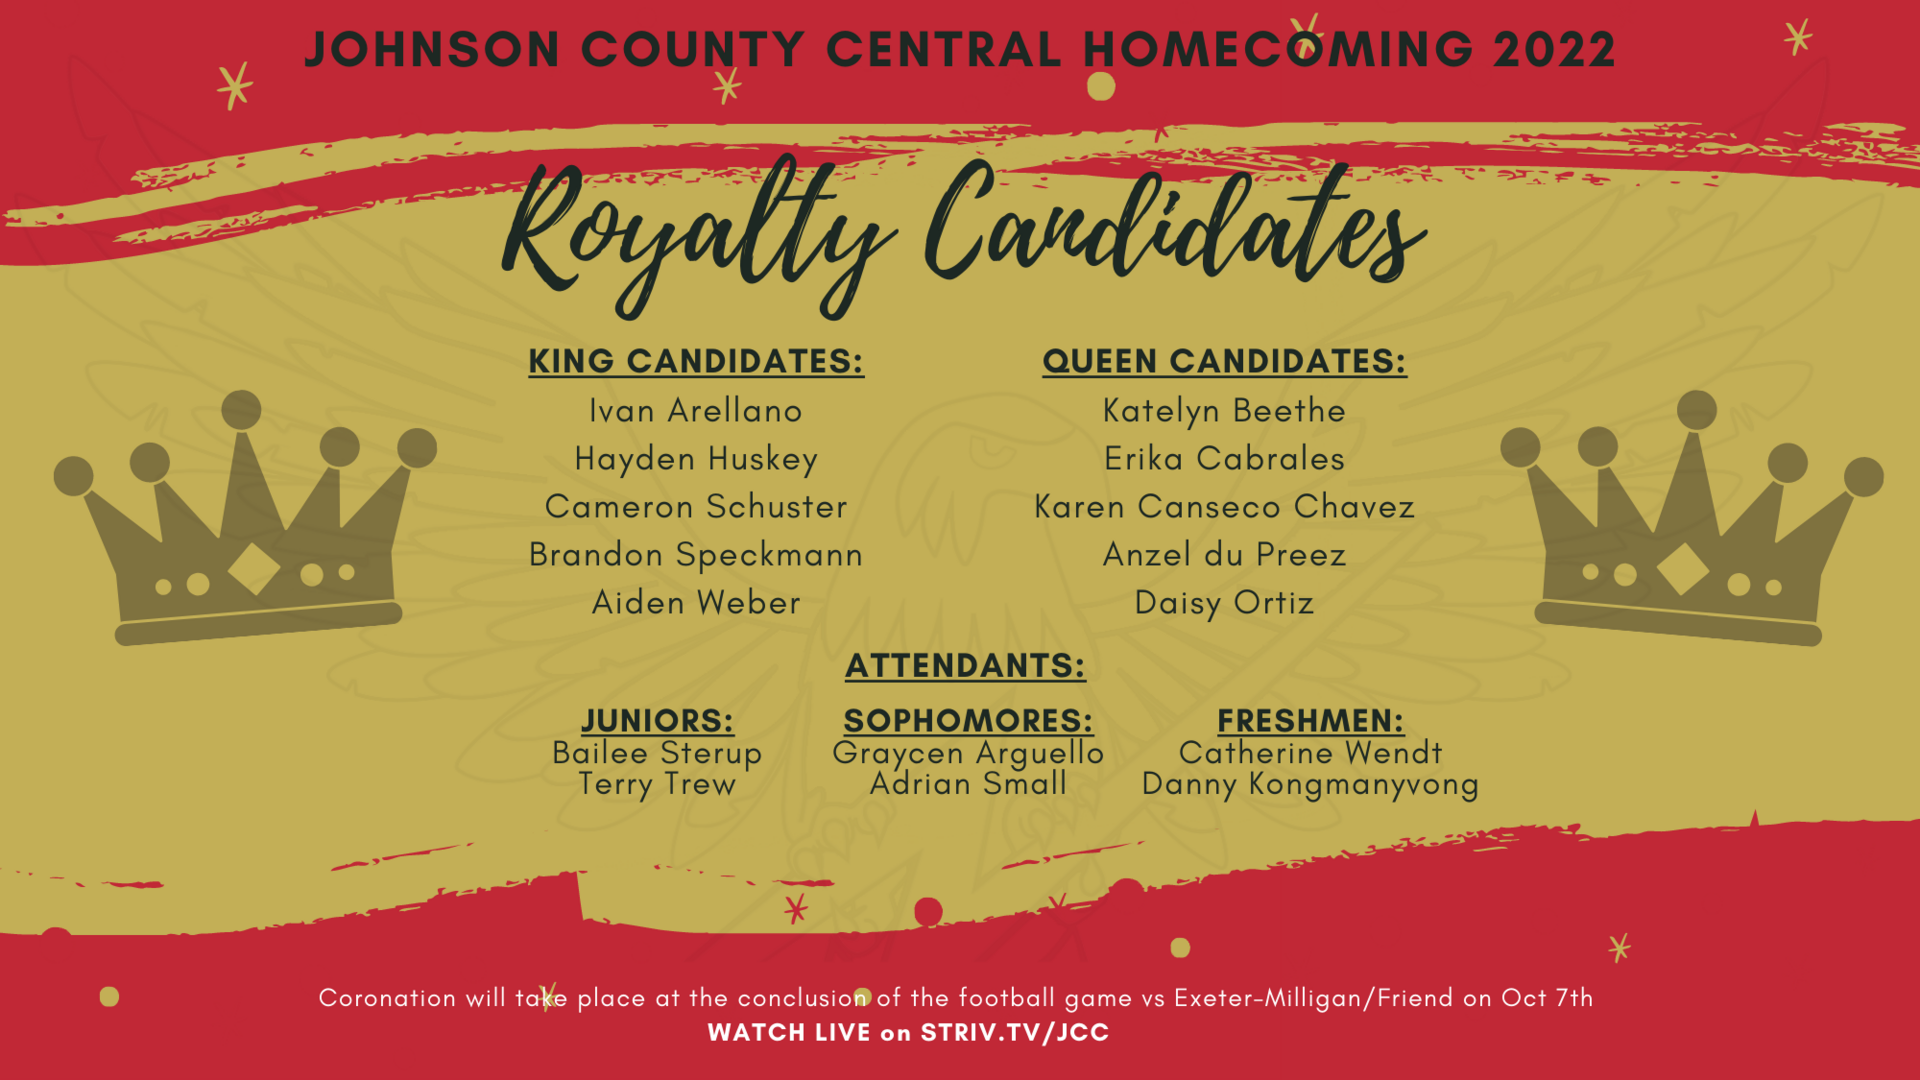 Homecoming Candidates